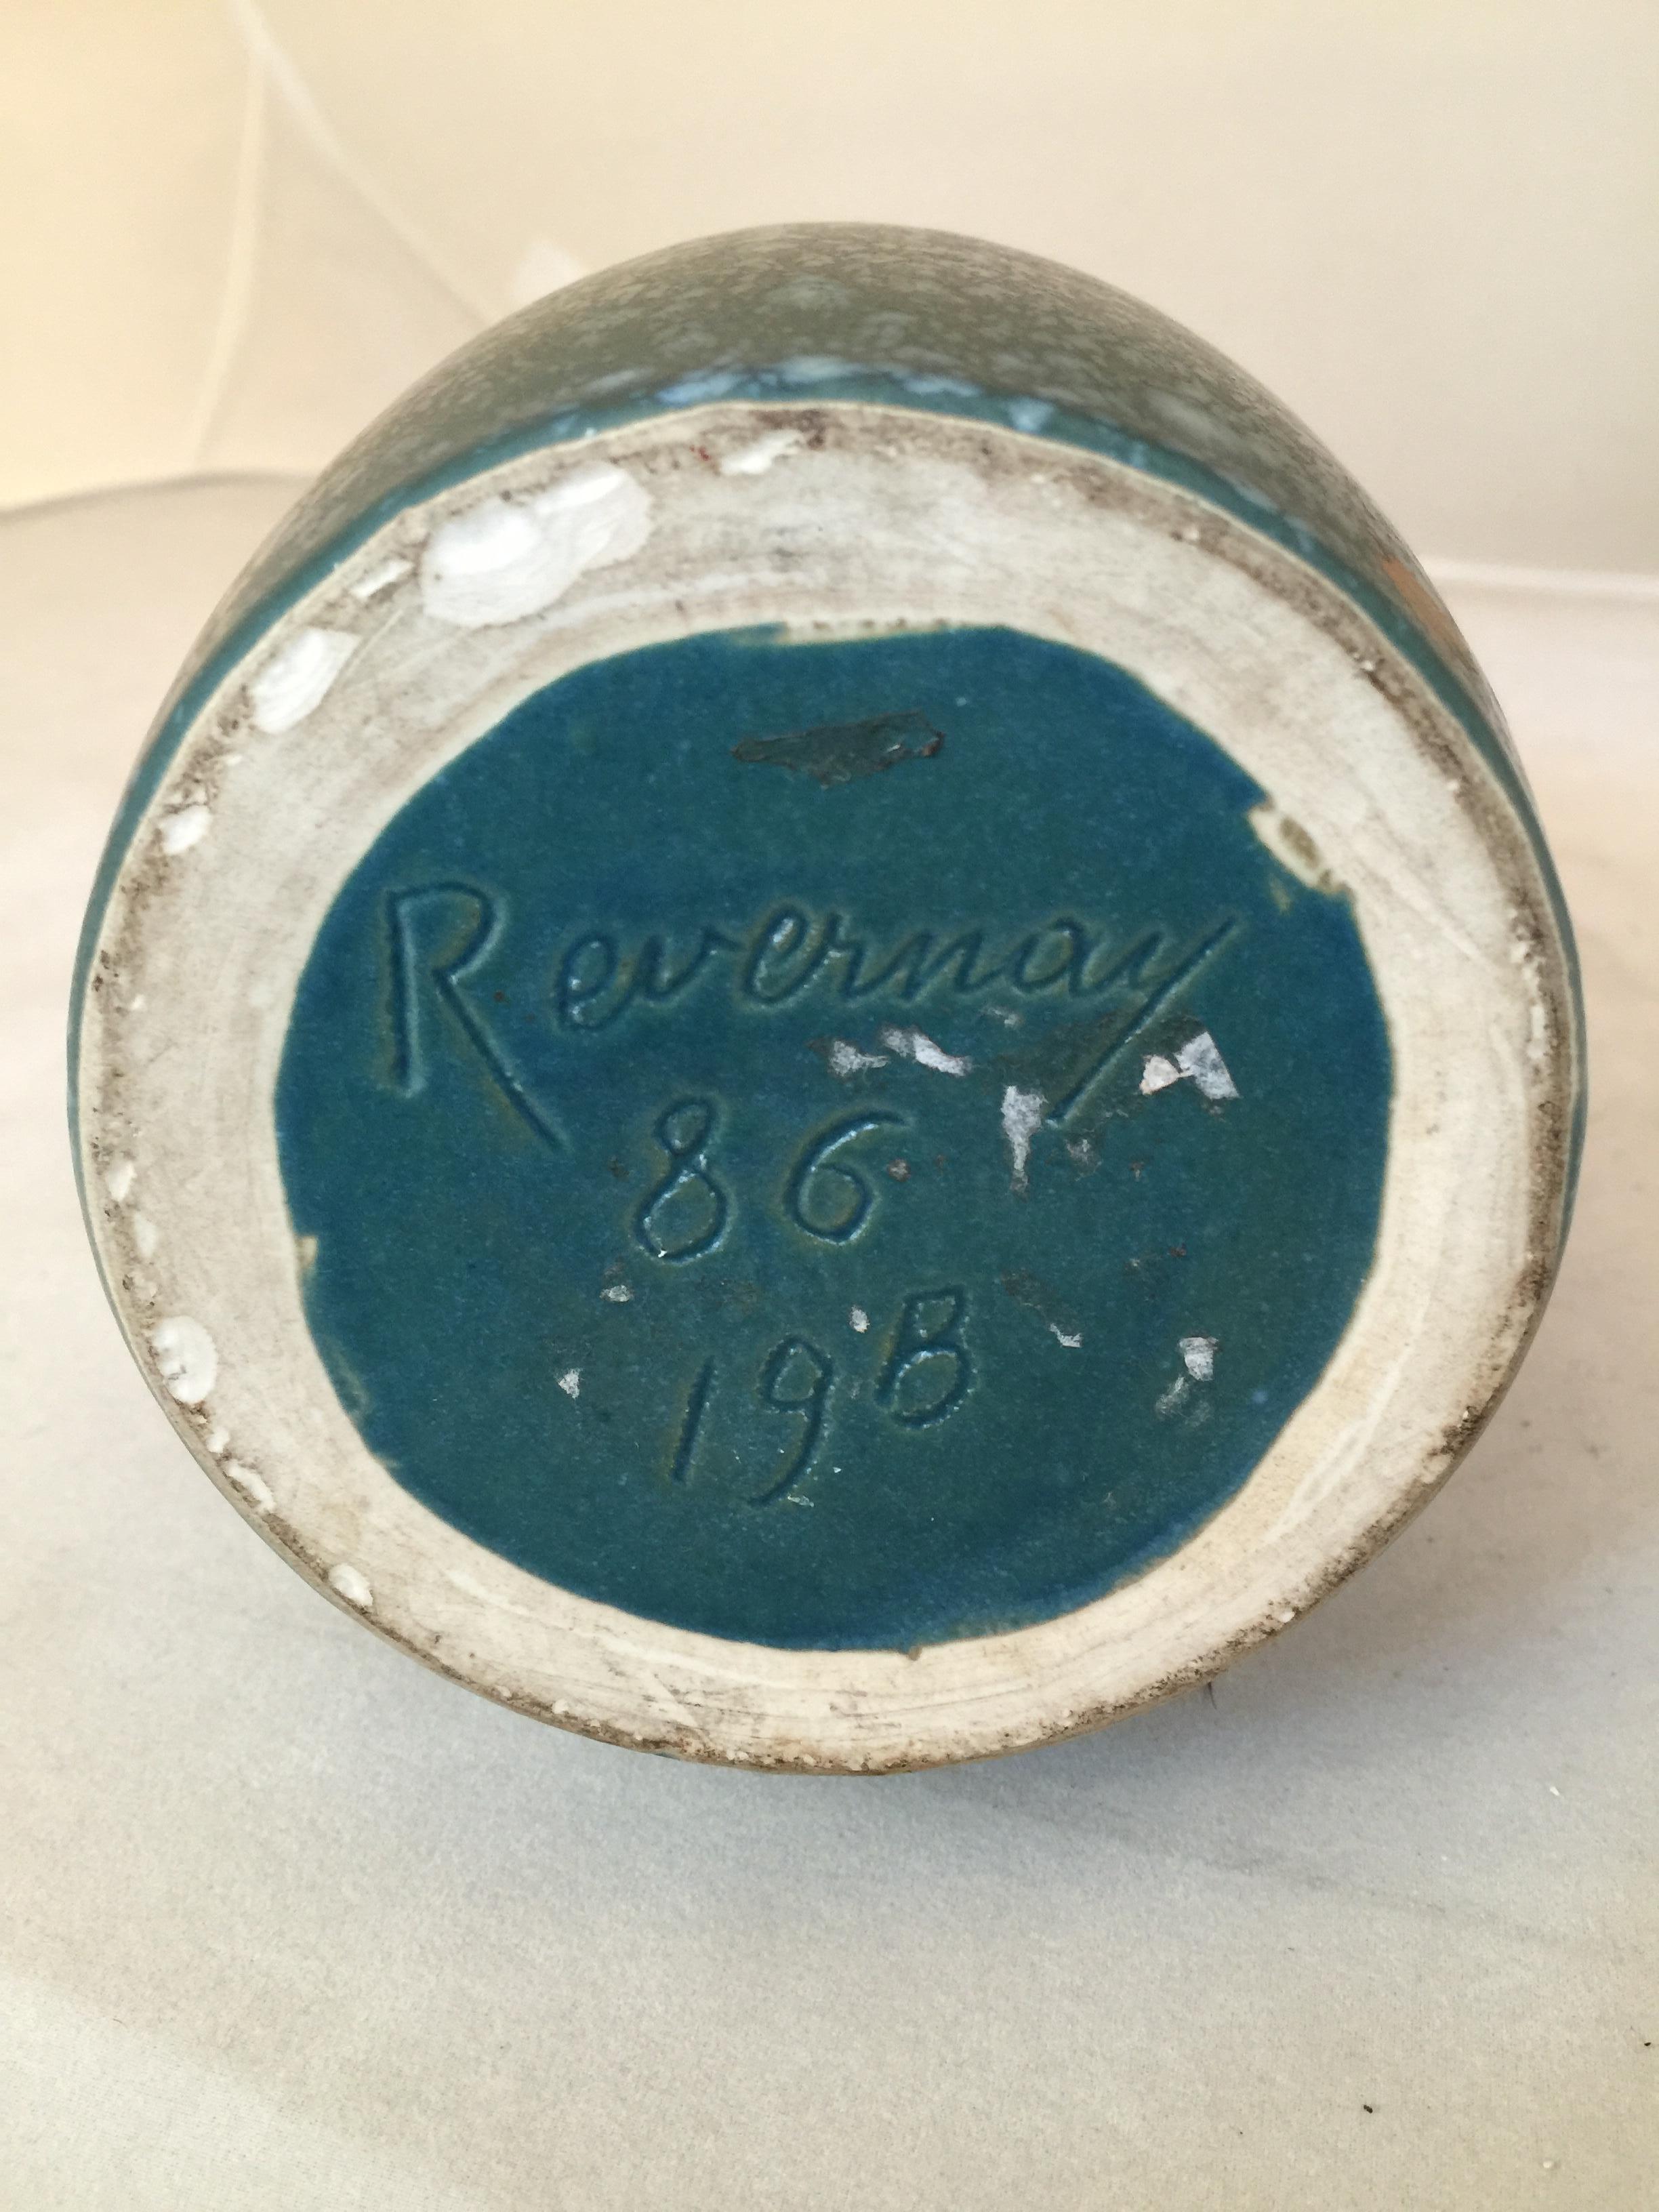 Early 20th Century Ceramic Sign: Revernay 86 19b For Sale